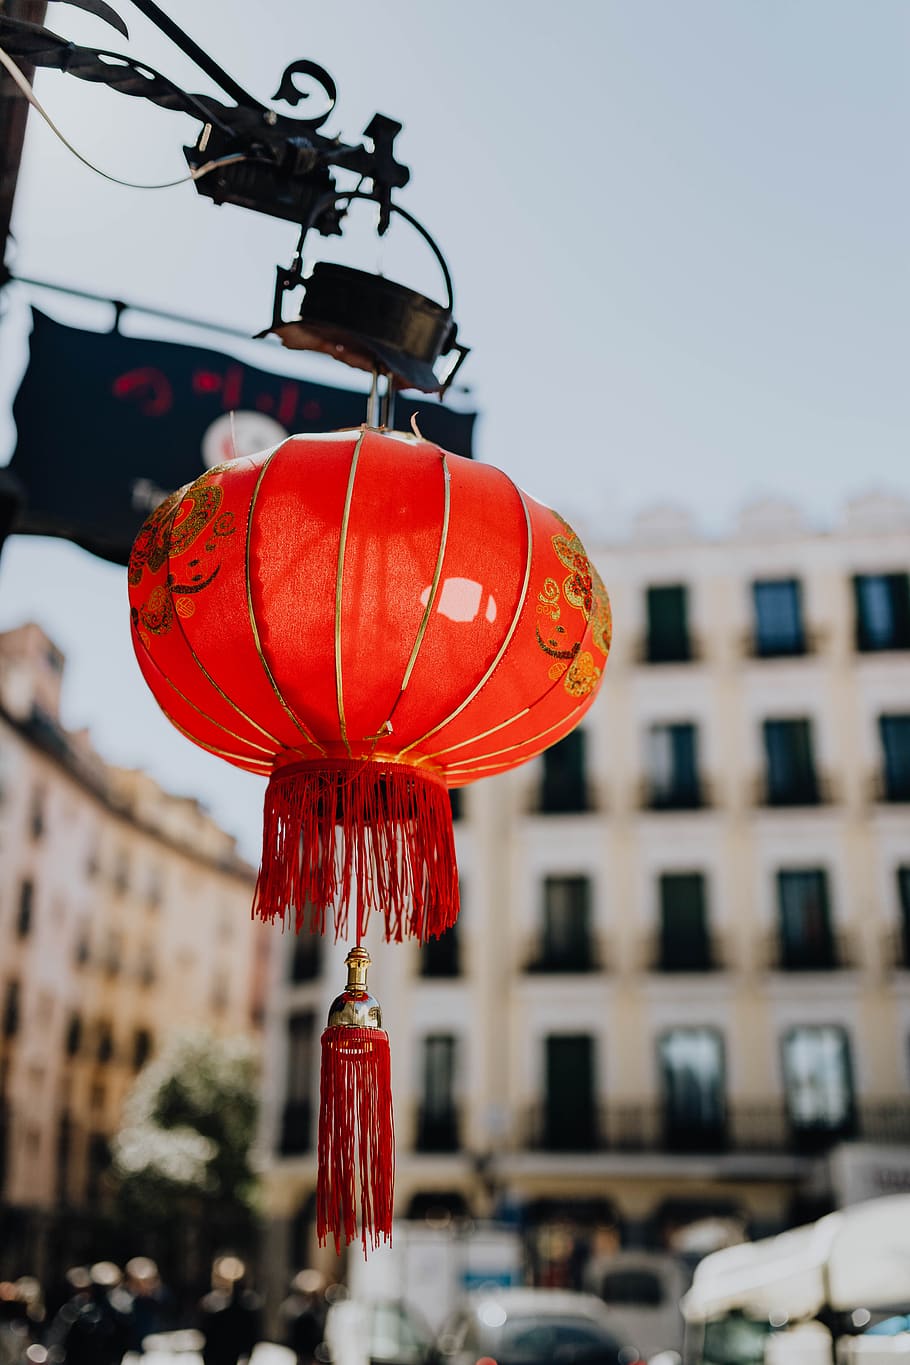 chinese, lamp, asia, lantern, traditional, Red, Madrid, Spain, building exterior, hanging